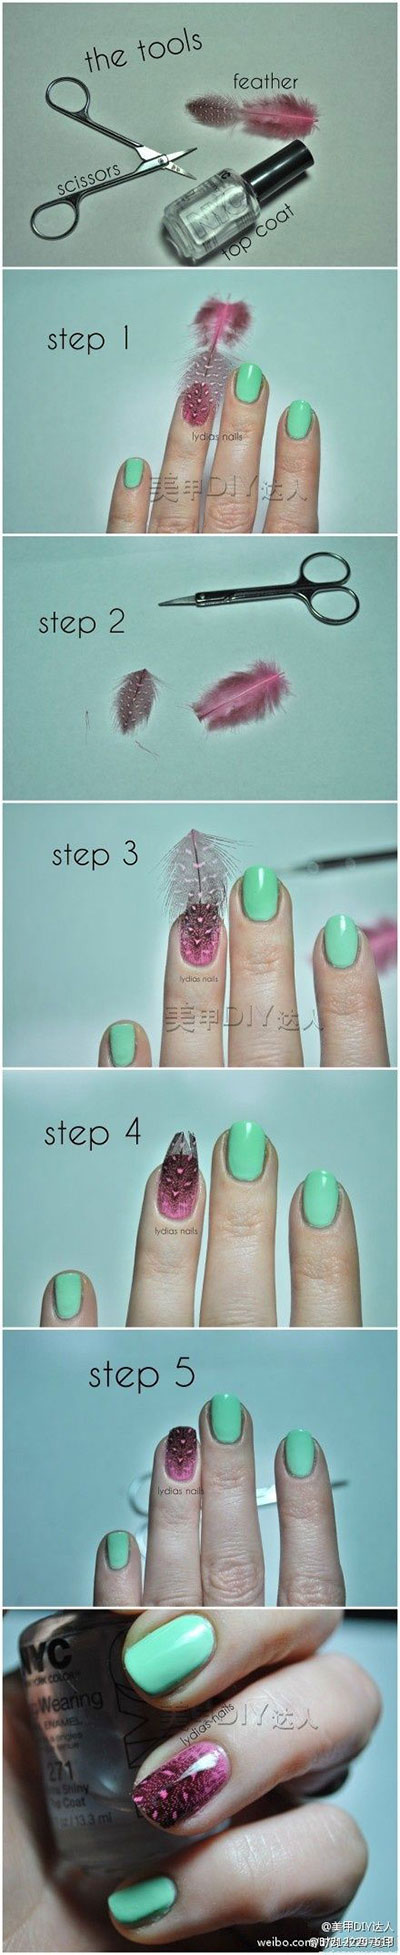 Step-By-Step-Nail-Art-Tutorials-For-Beginners-Learners-2013-2014-9